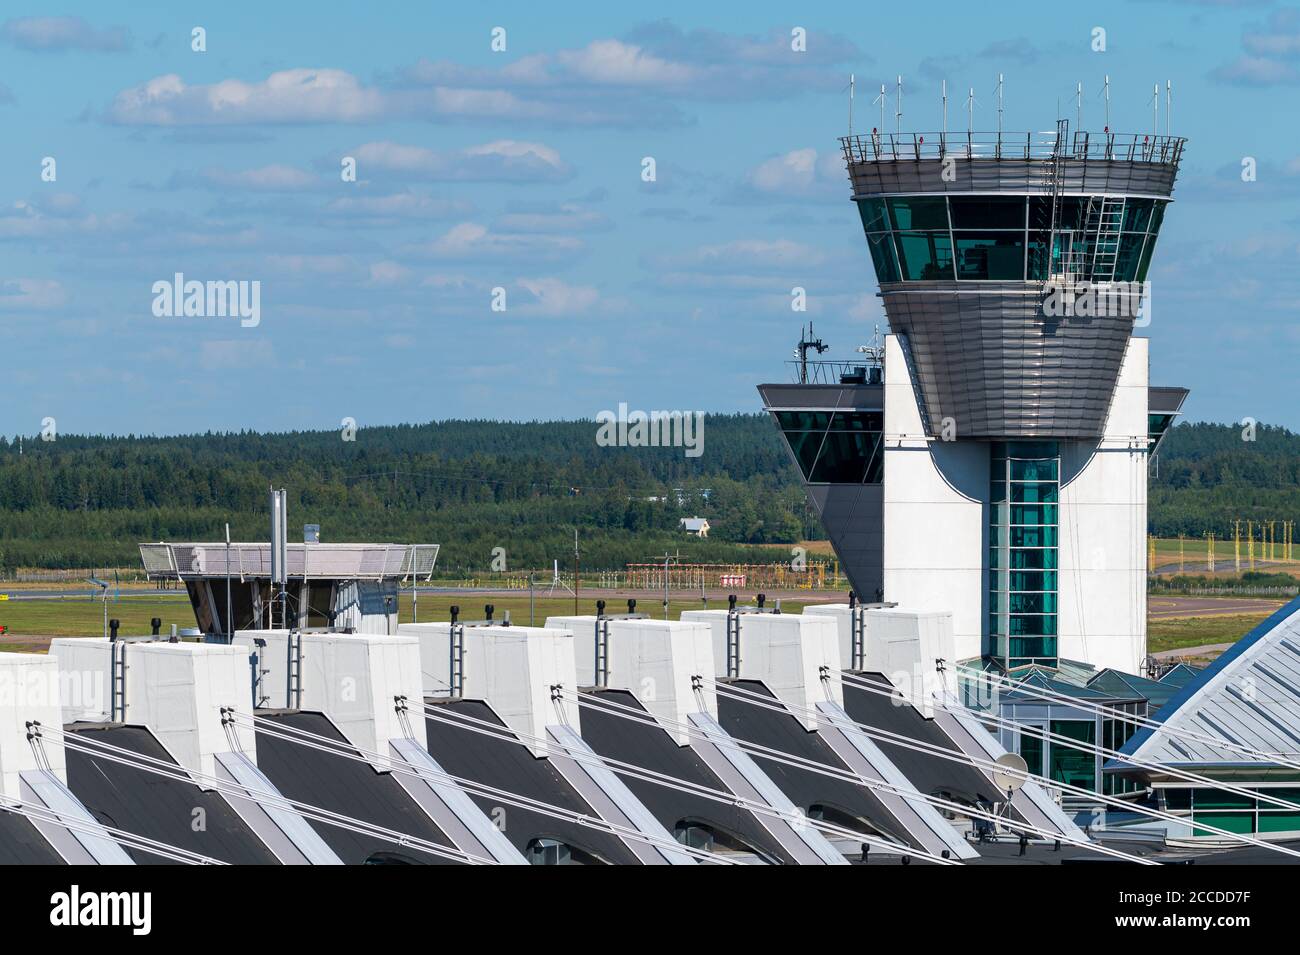 Helsinki / Finland - August 21, 2020: The busiest international airport in Finland have had only a handful of airside operations due to covid-19 Stock Photo